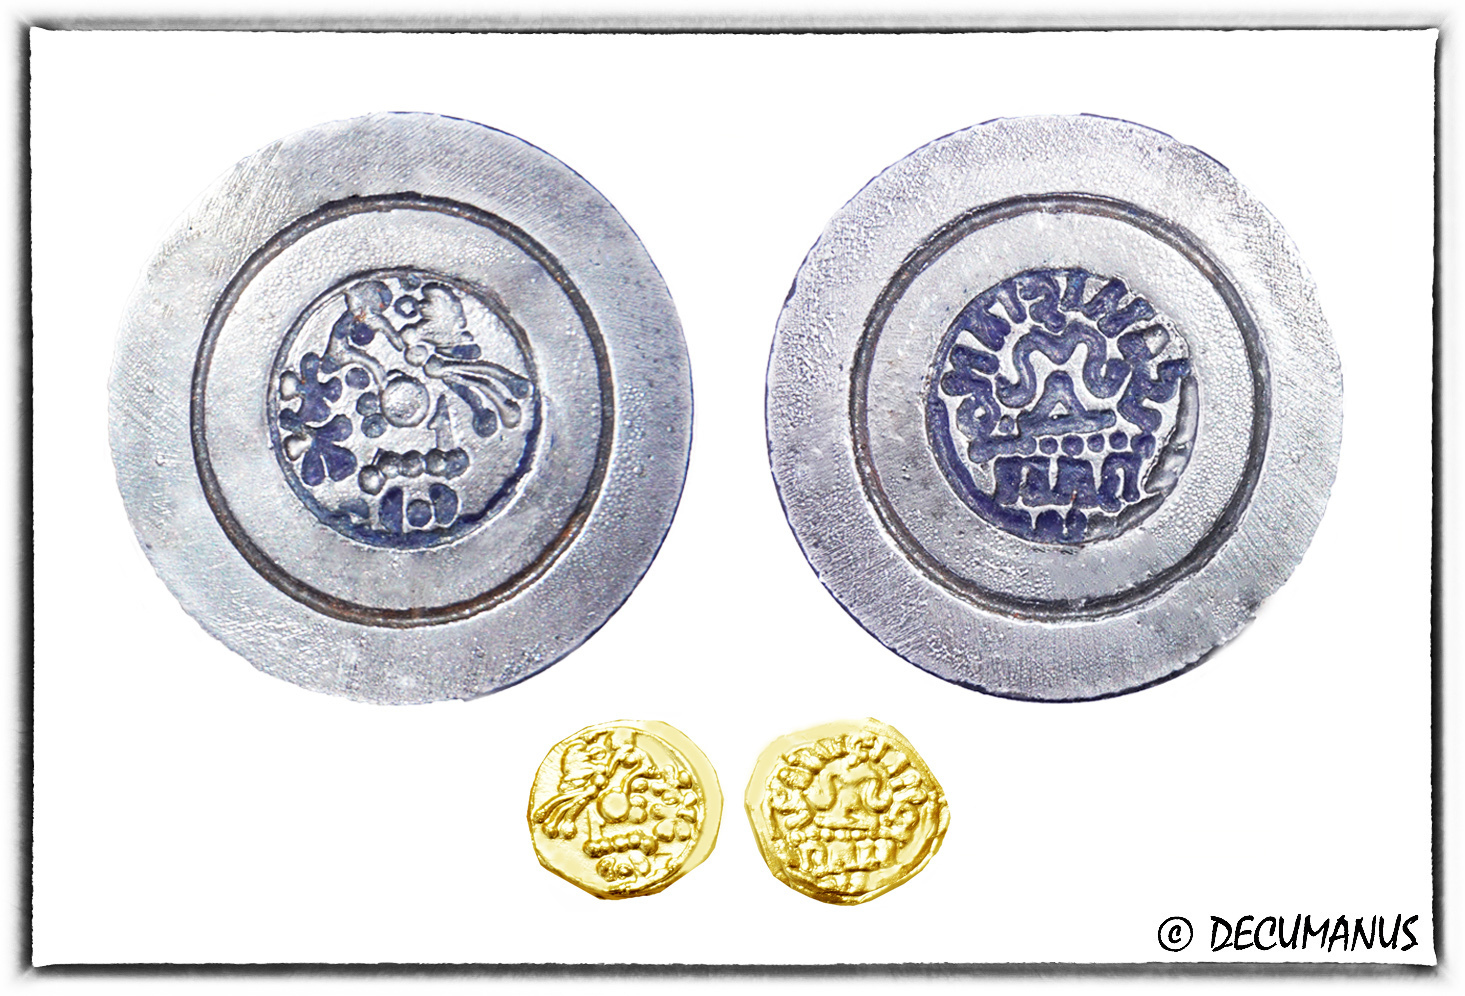 DIES OF COIN FOR A TRIENS OF BANASSAC (7th c. AD))